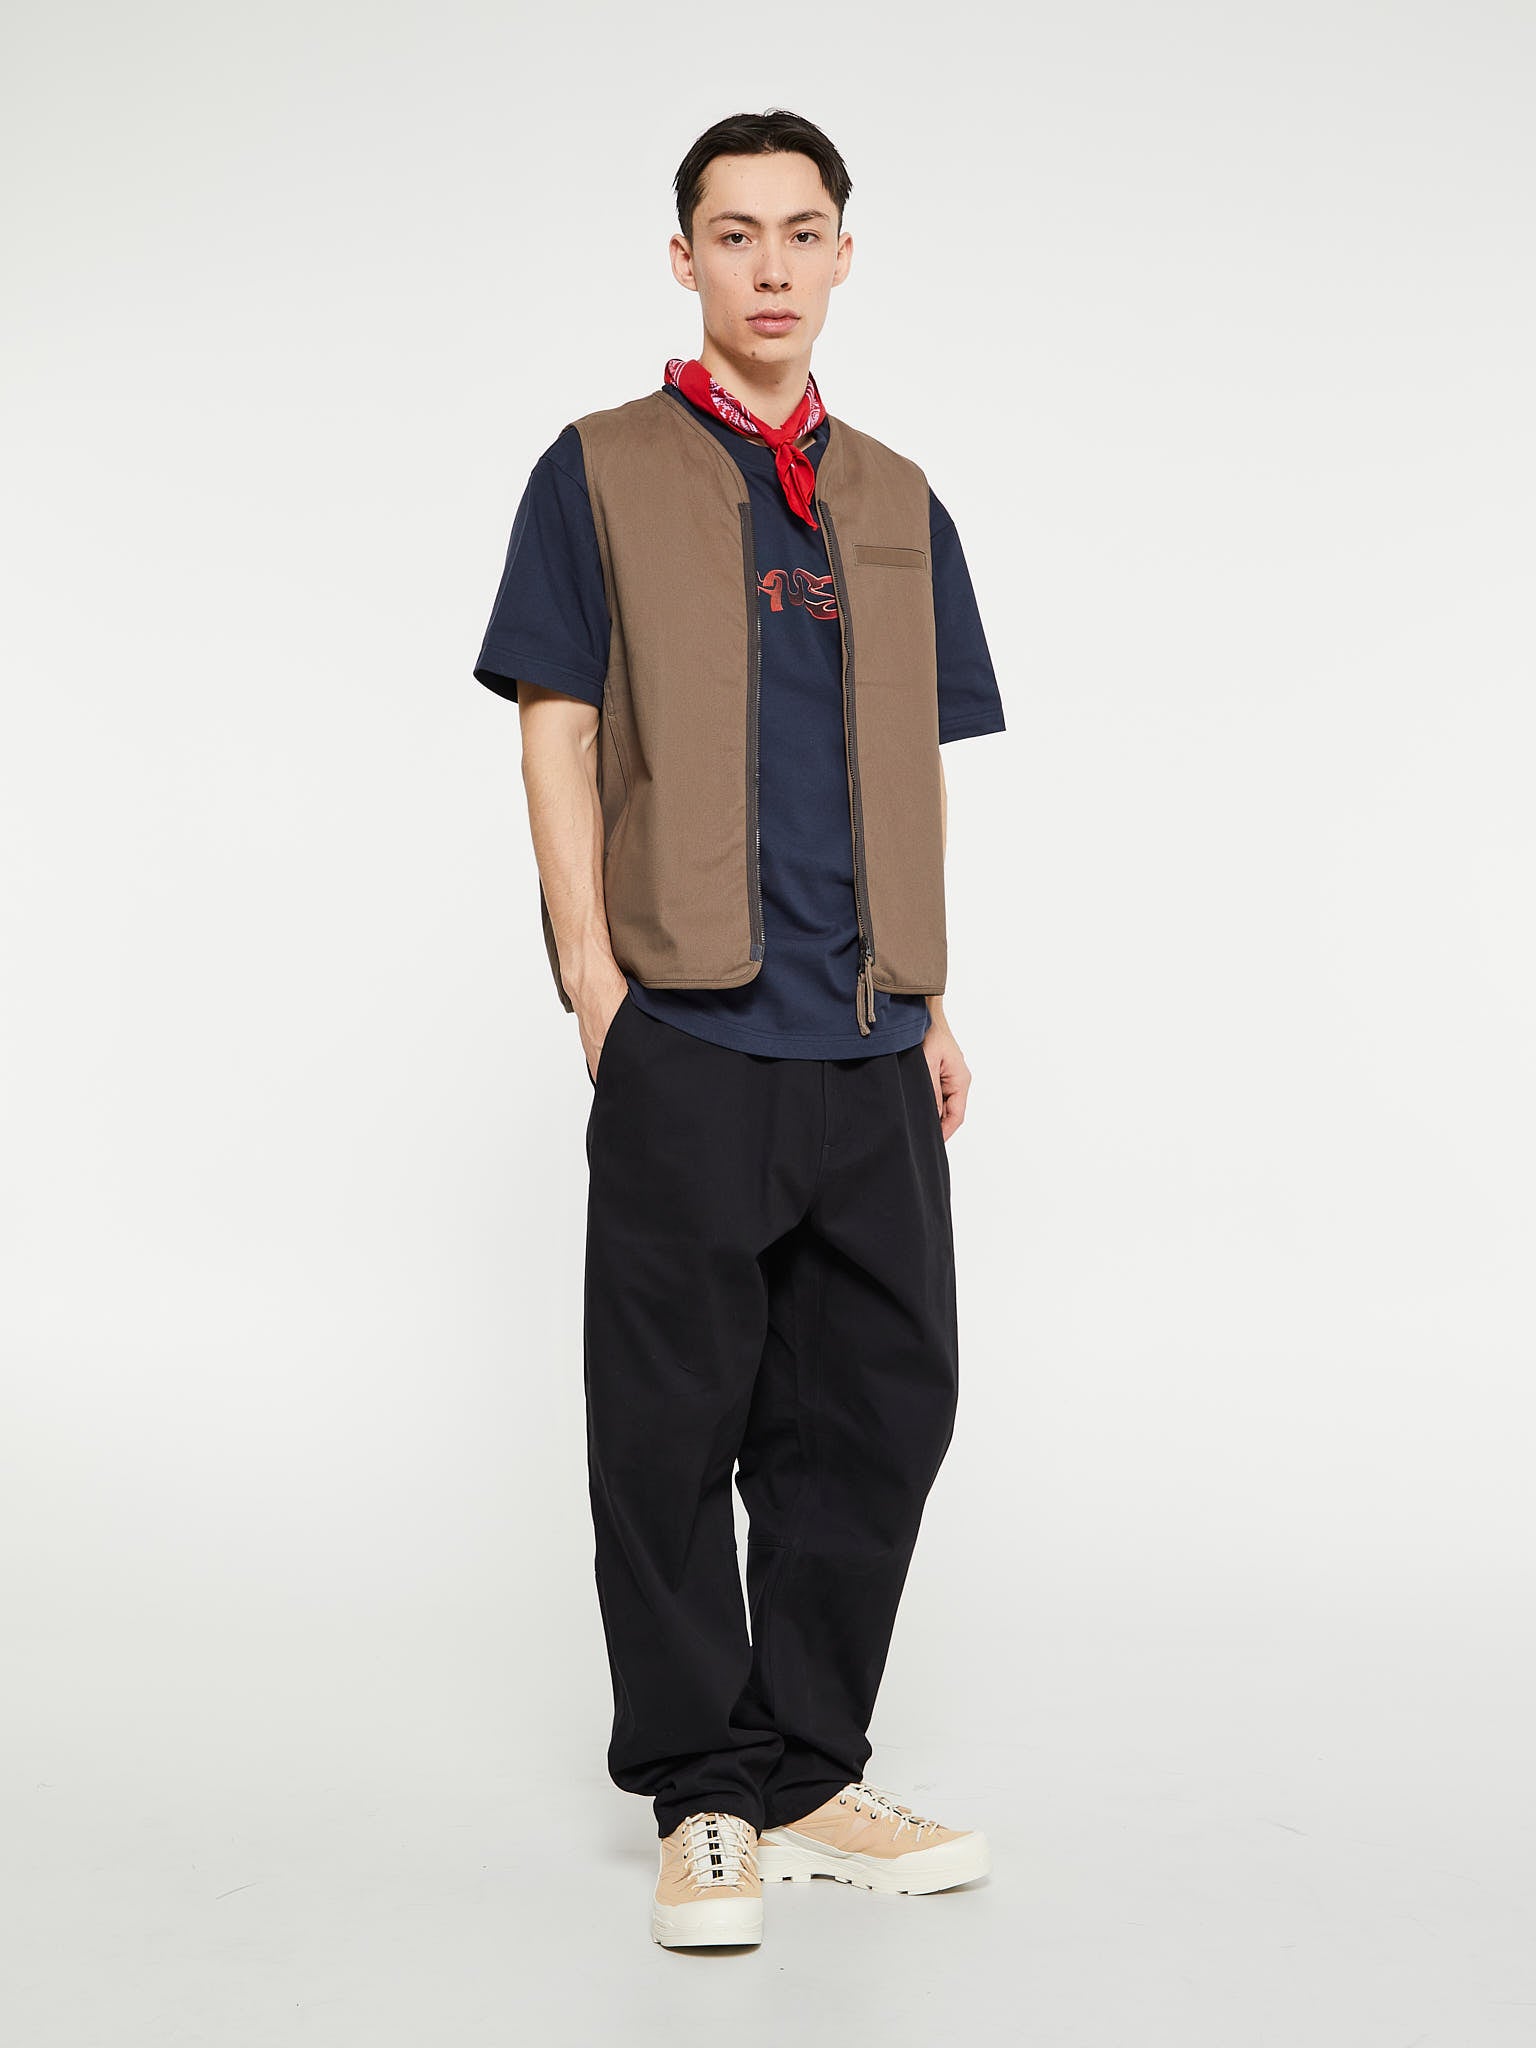 Off-Race Cotton Twill Pants in Black